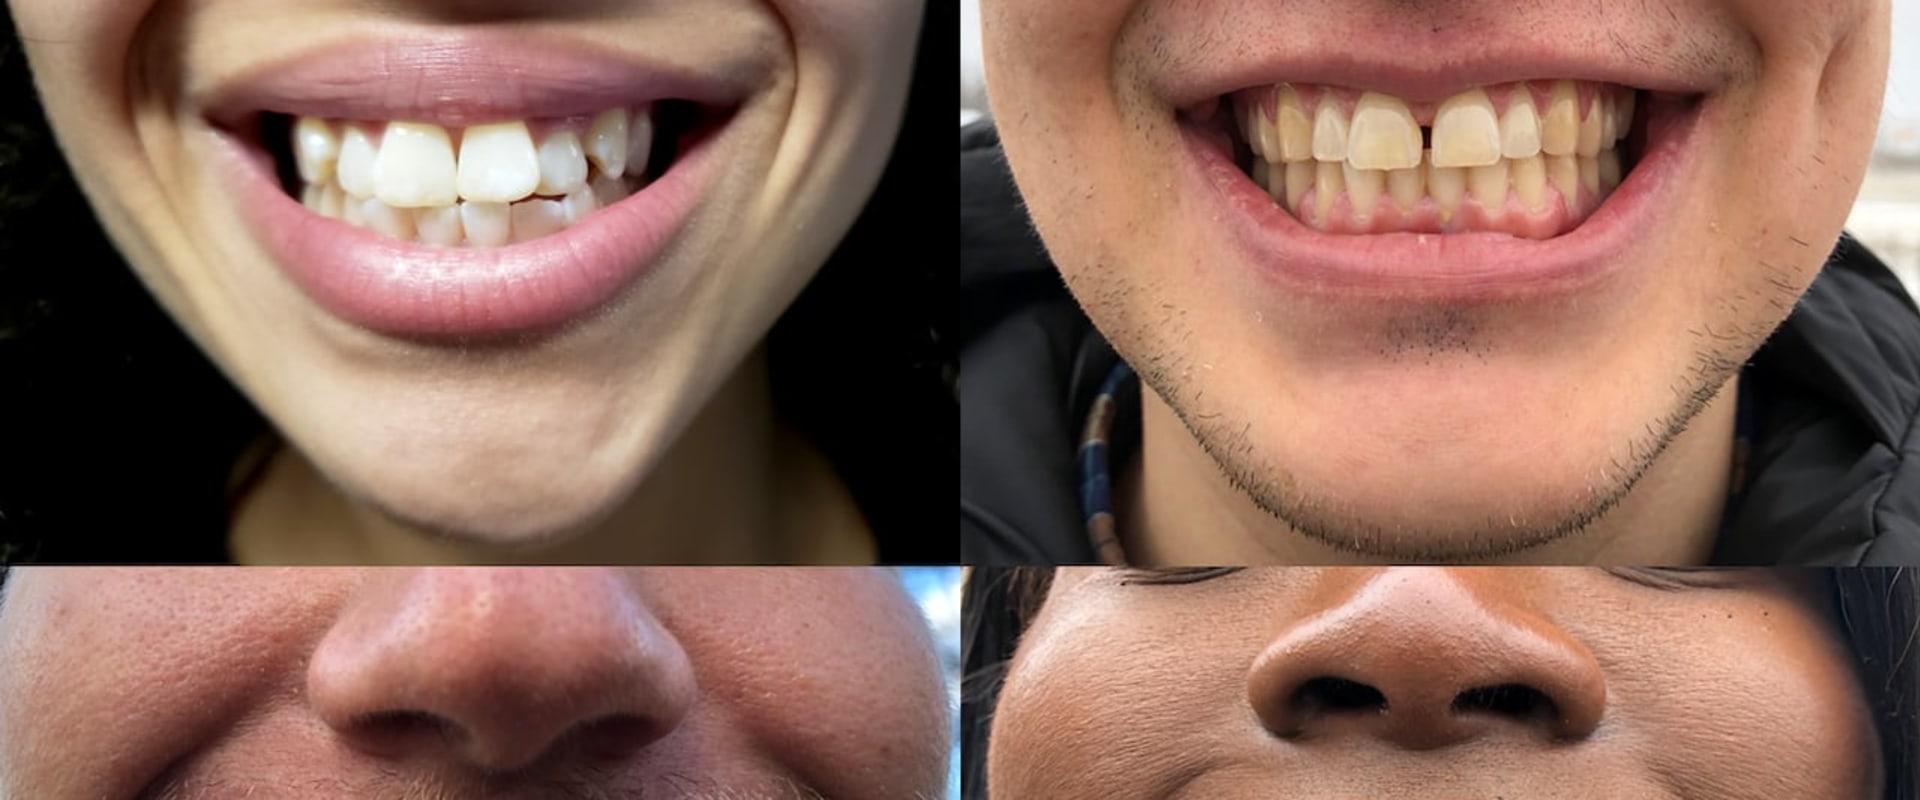 Can Smile Direct Really Fix Crooked Teeth? - An Expert's Perspective